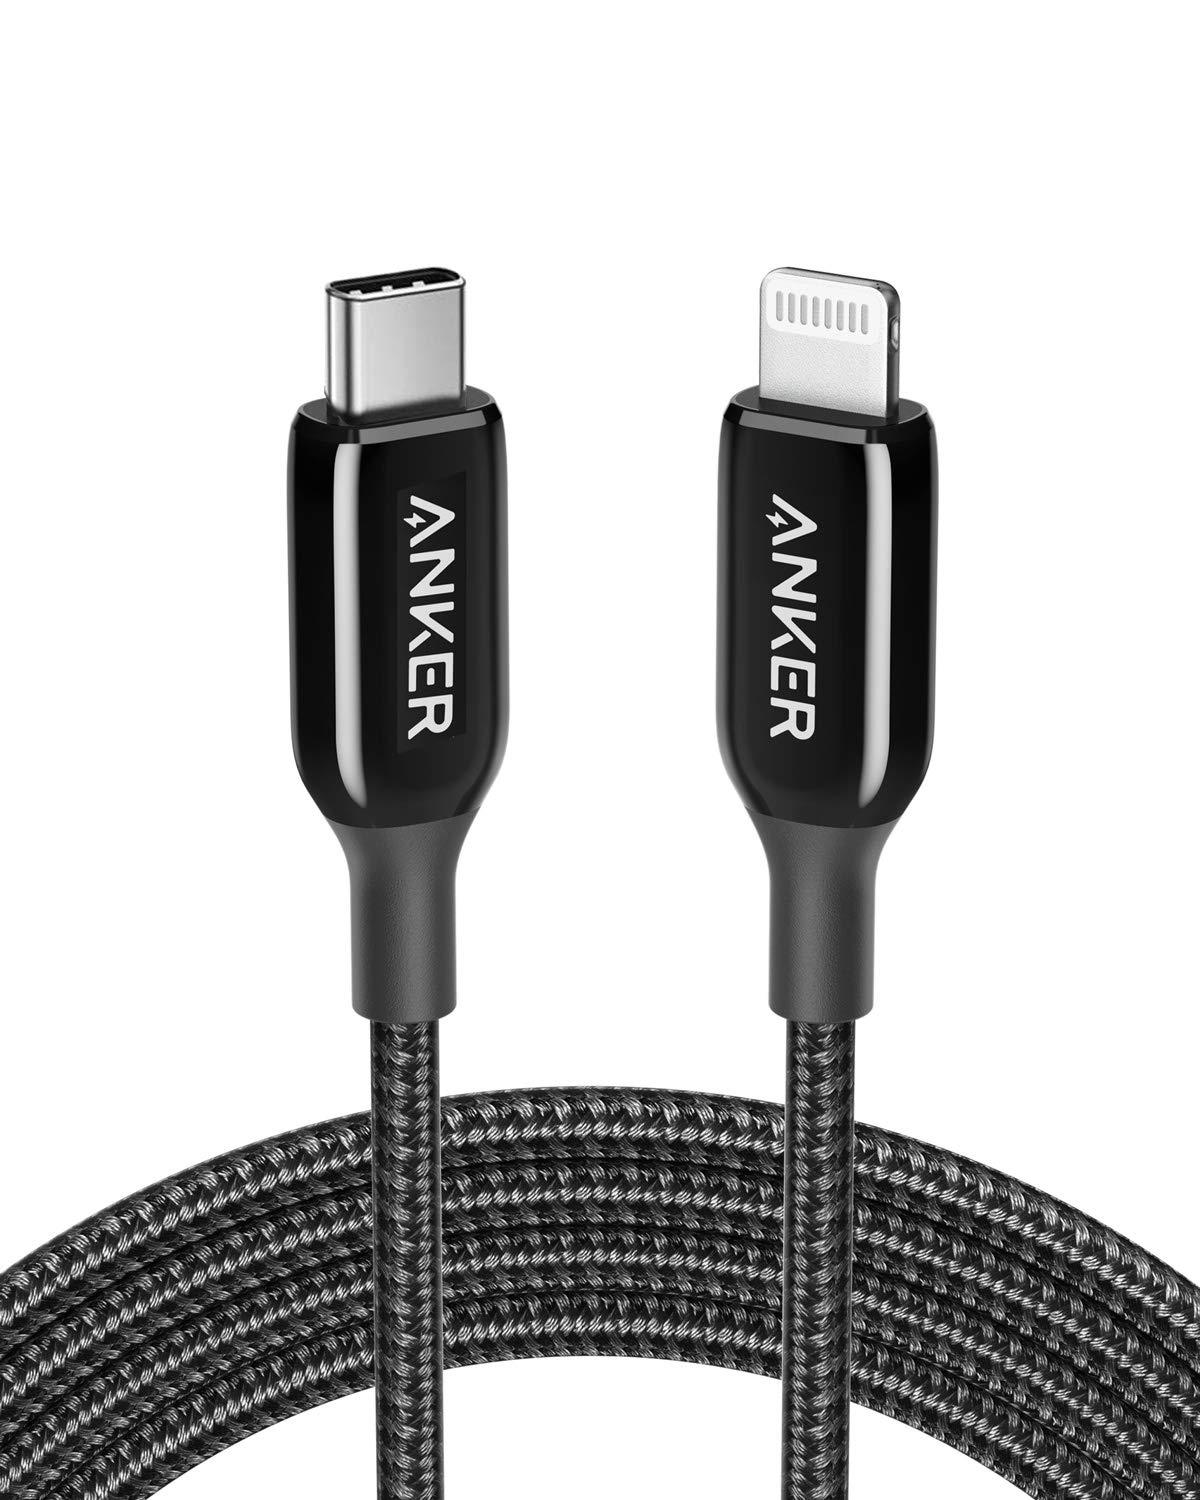 ANKER PowerLine+ III USB-C to Lightning Cable 3FT / 0.9M